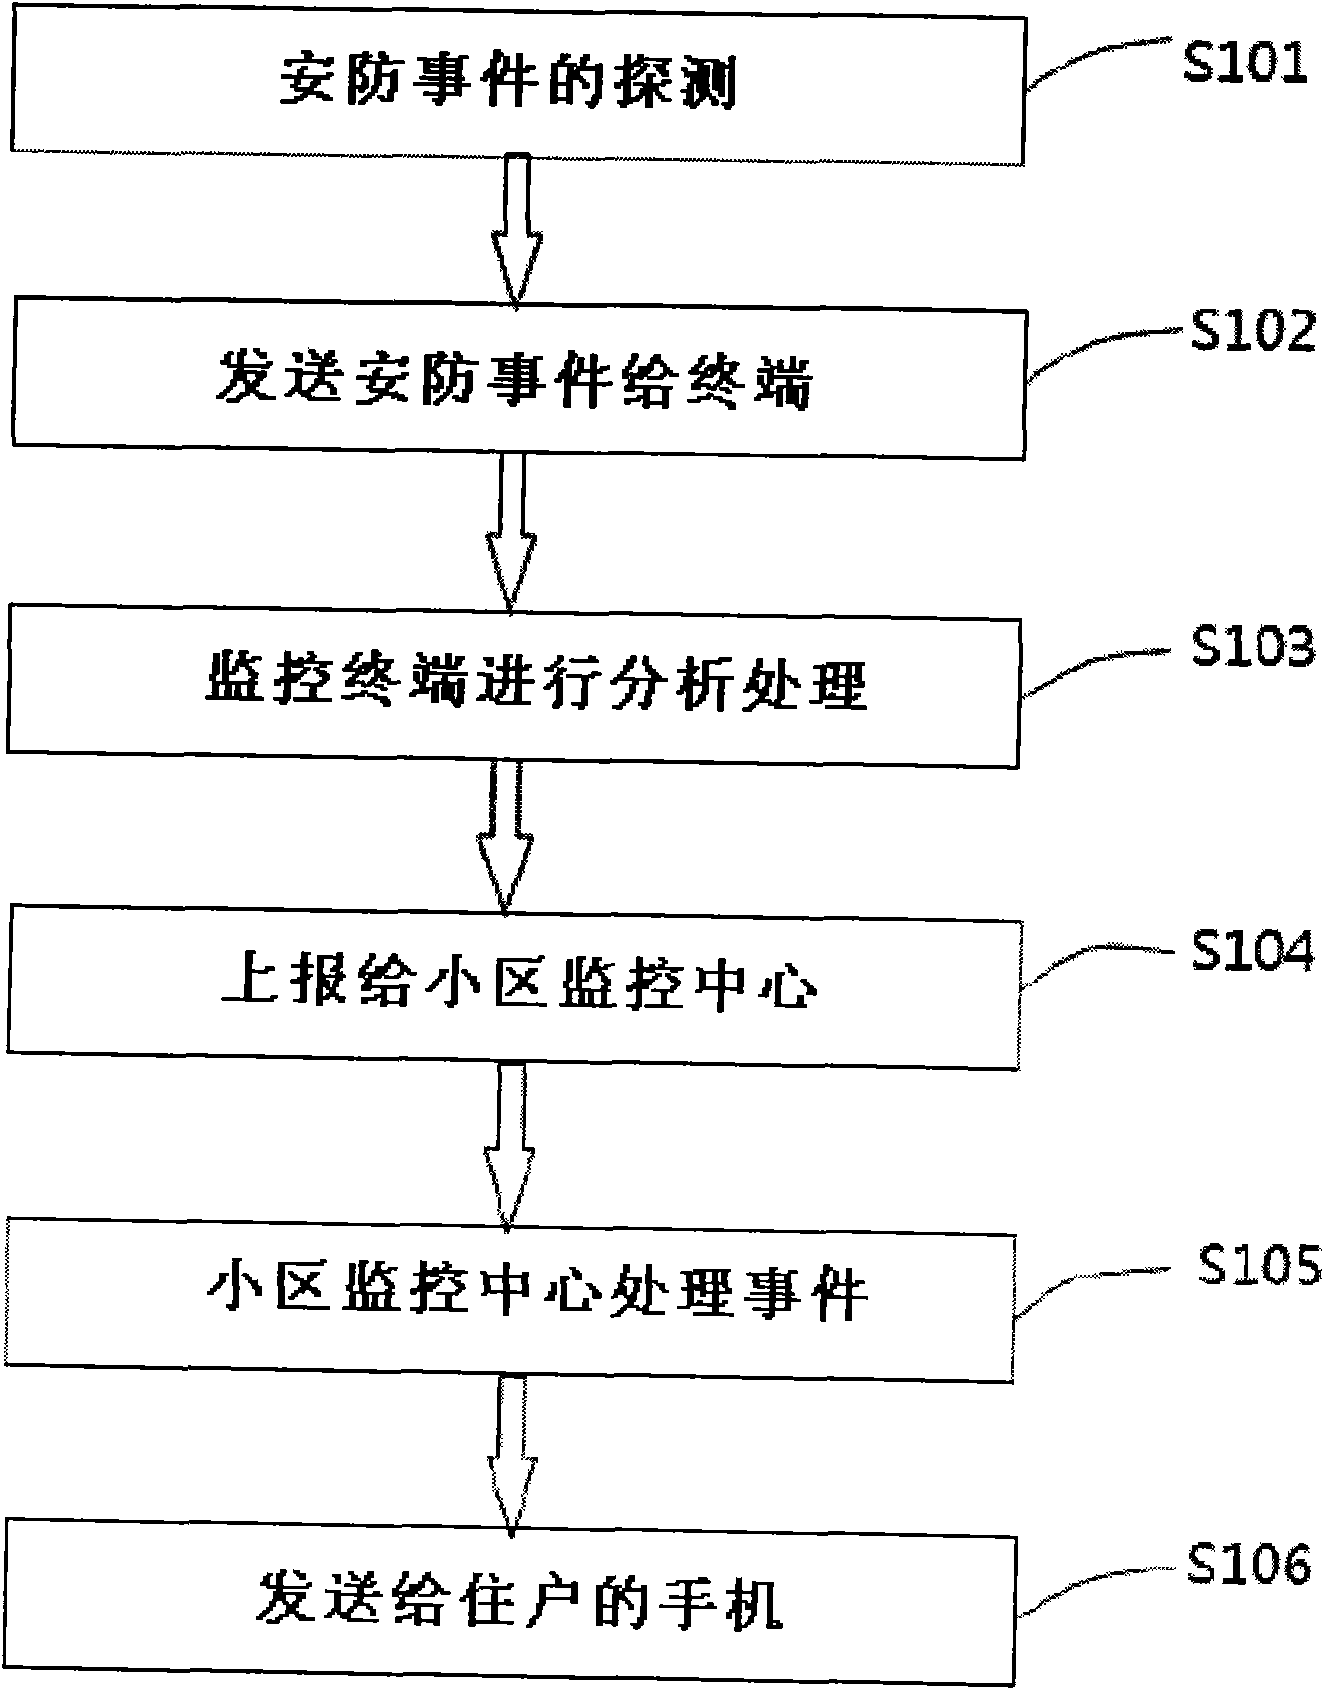 Security monitoring system and monitoring method for residential area